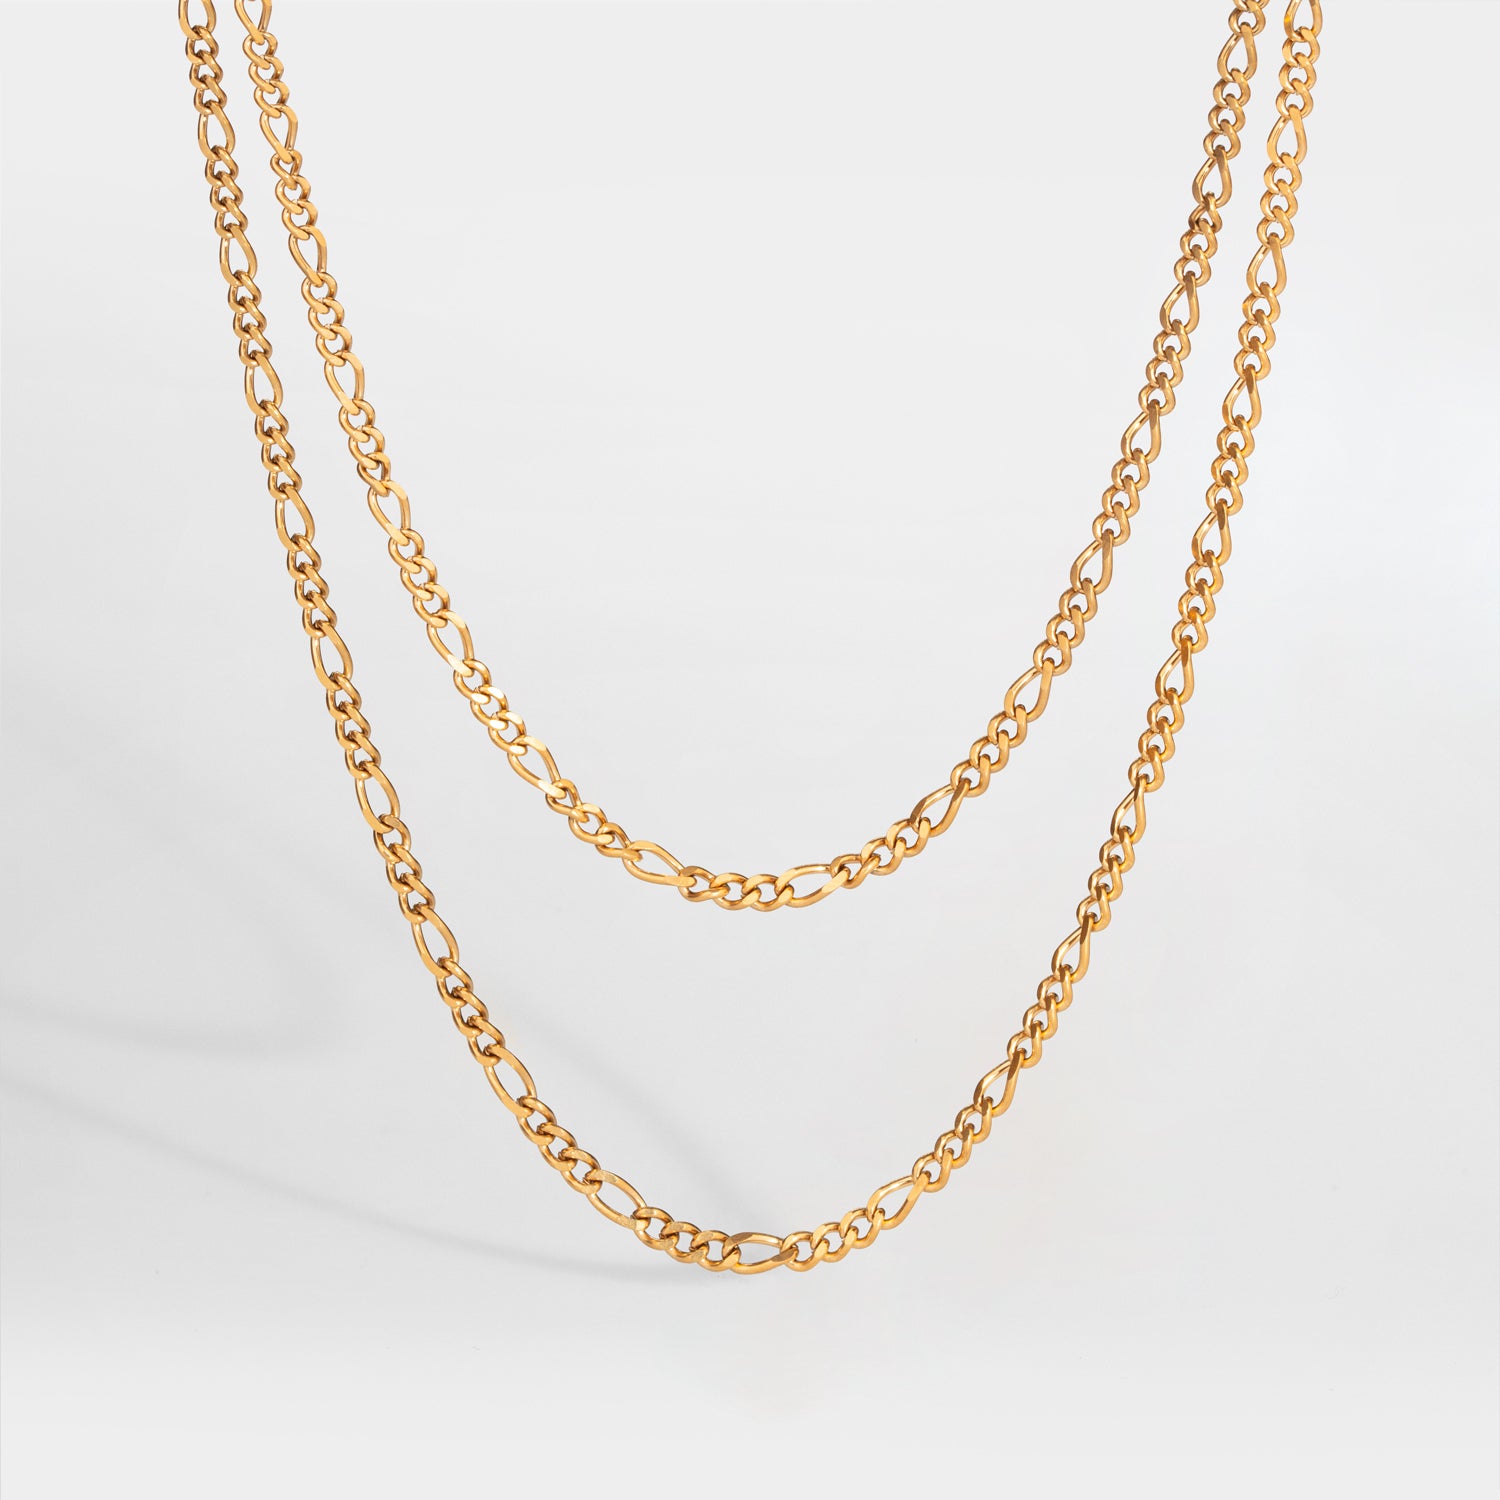 NL Double Antique chain - Gold-toned